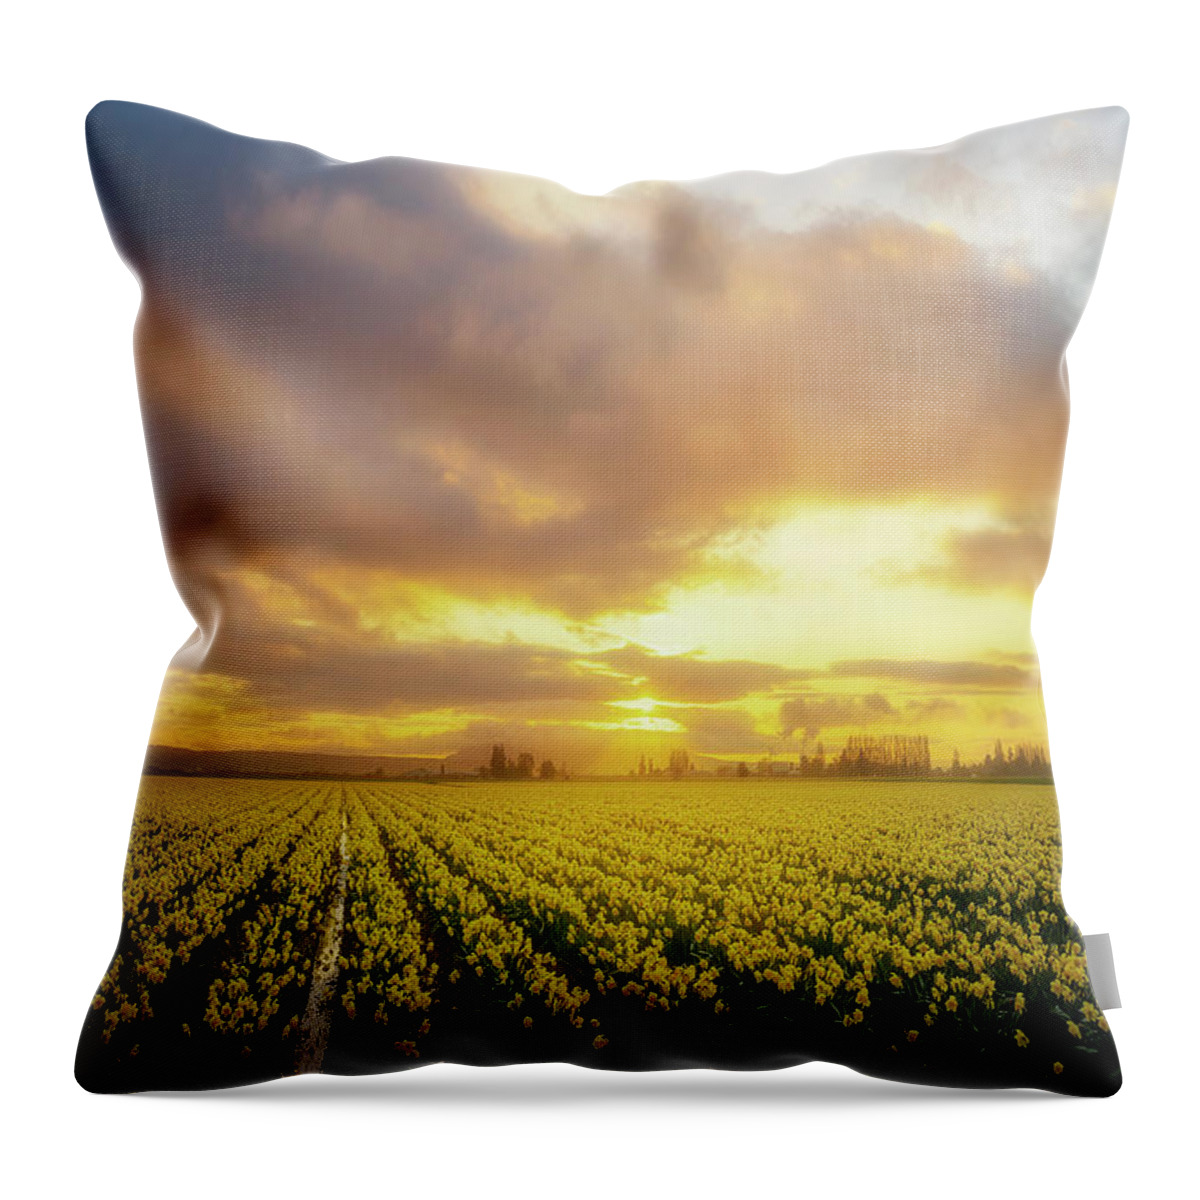 Daffodil Throw Pillow featuring the photograph Daffodil Sunset by Ryan Manuel